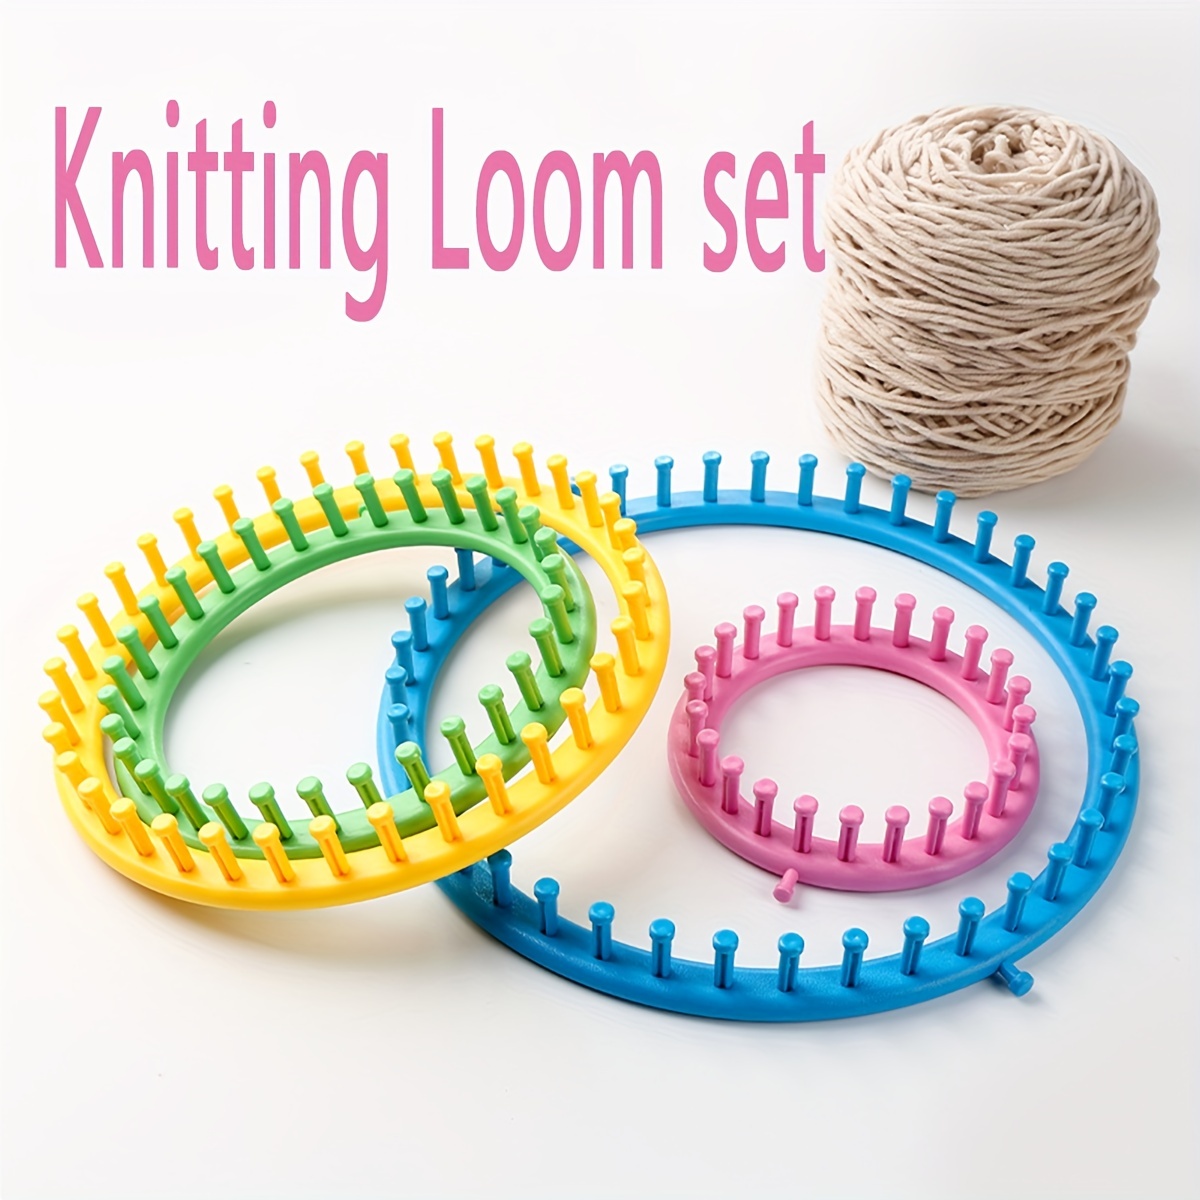 Long Knitting Loom Set with Hook Needle Kit for Yarn Cord Knitter